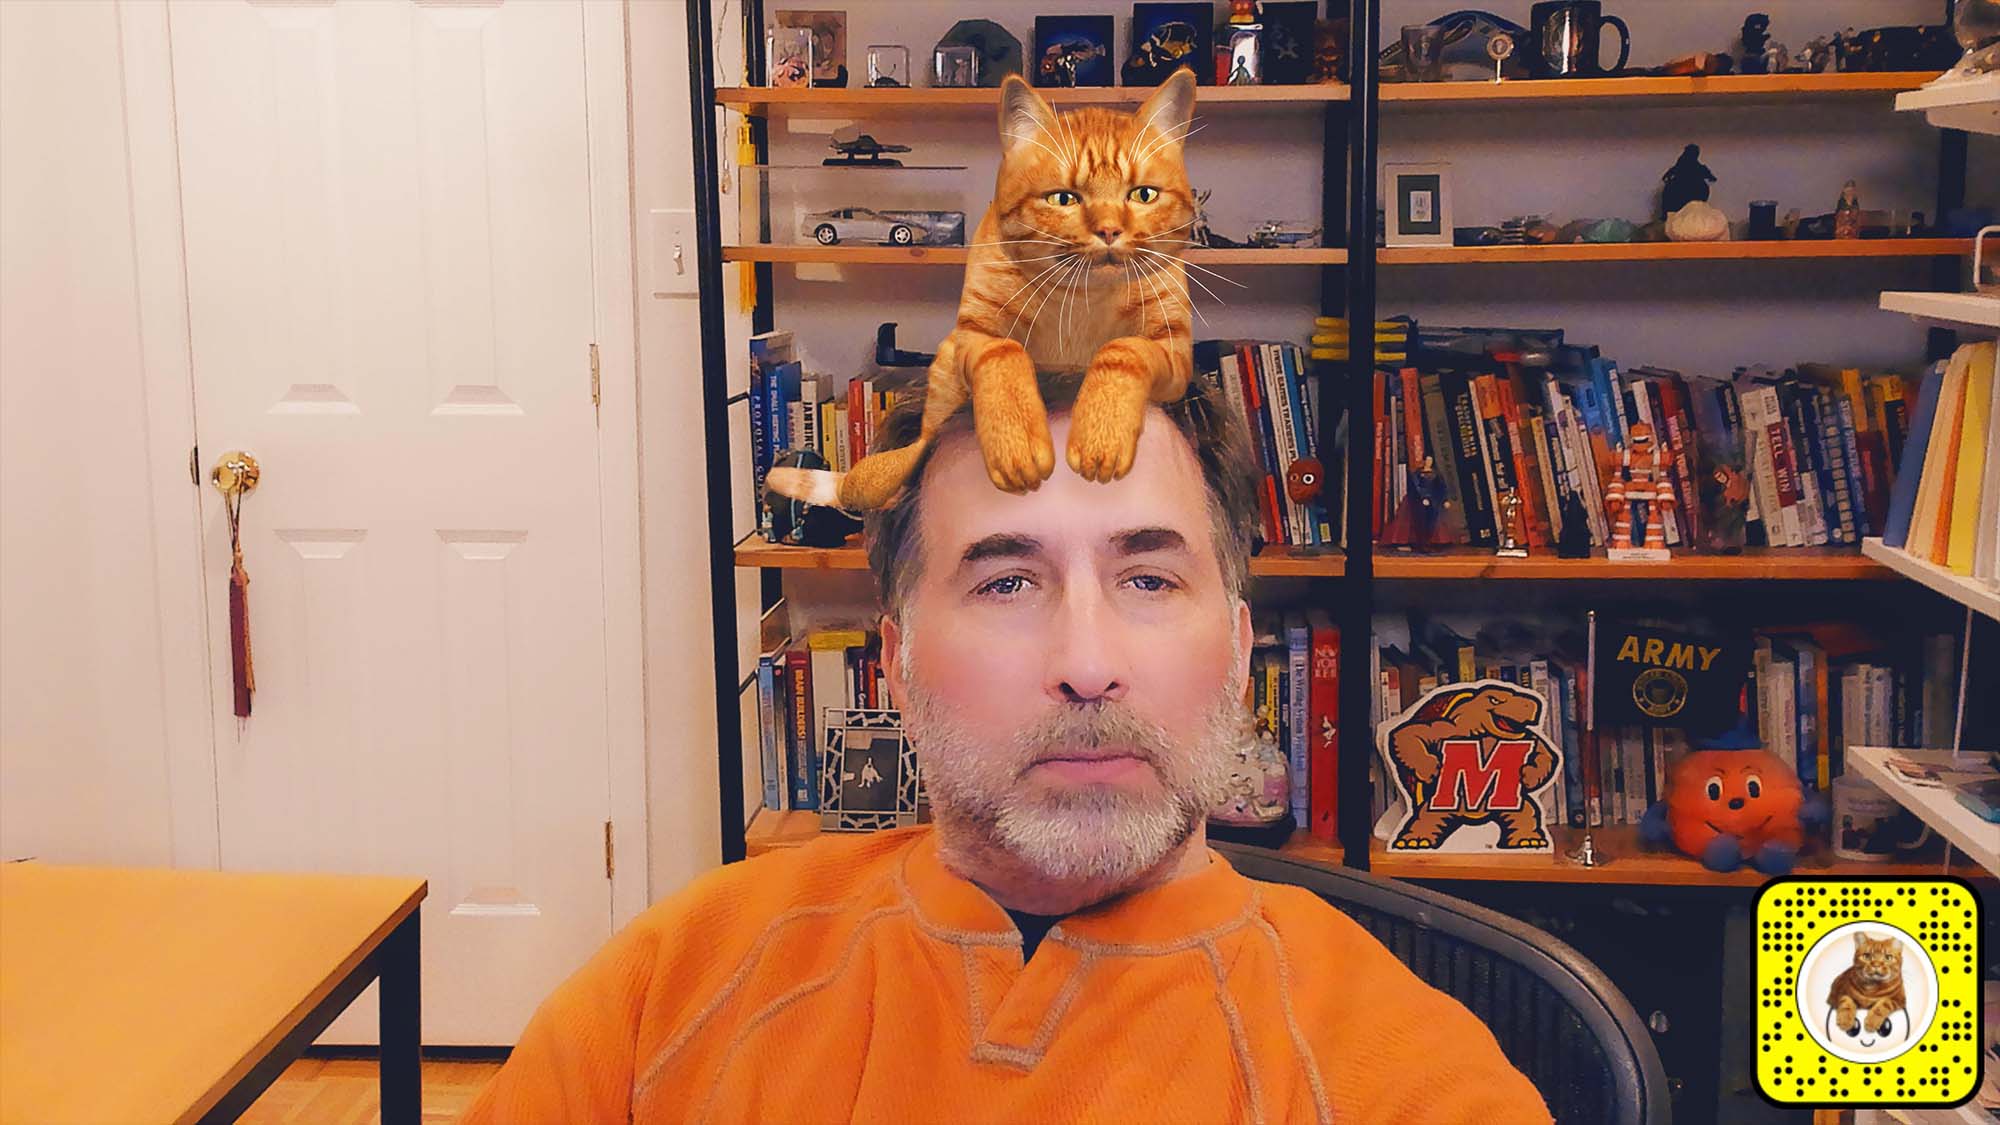 Snap Camera filter lens for a cat on your head